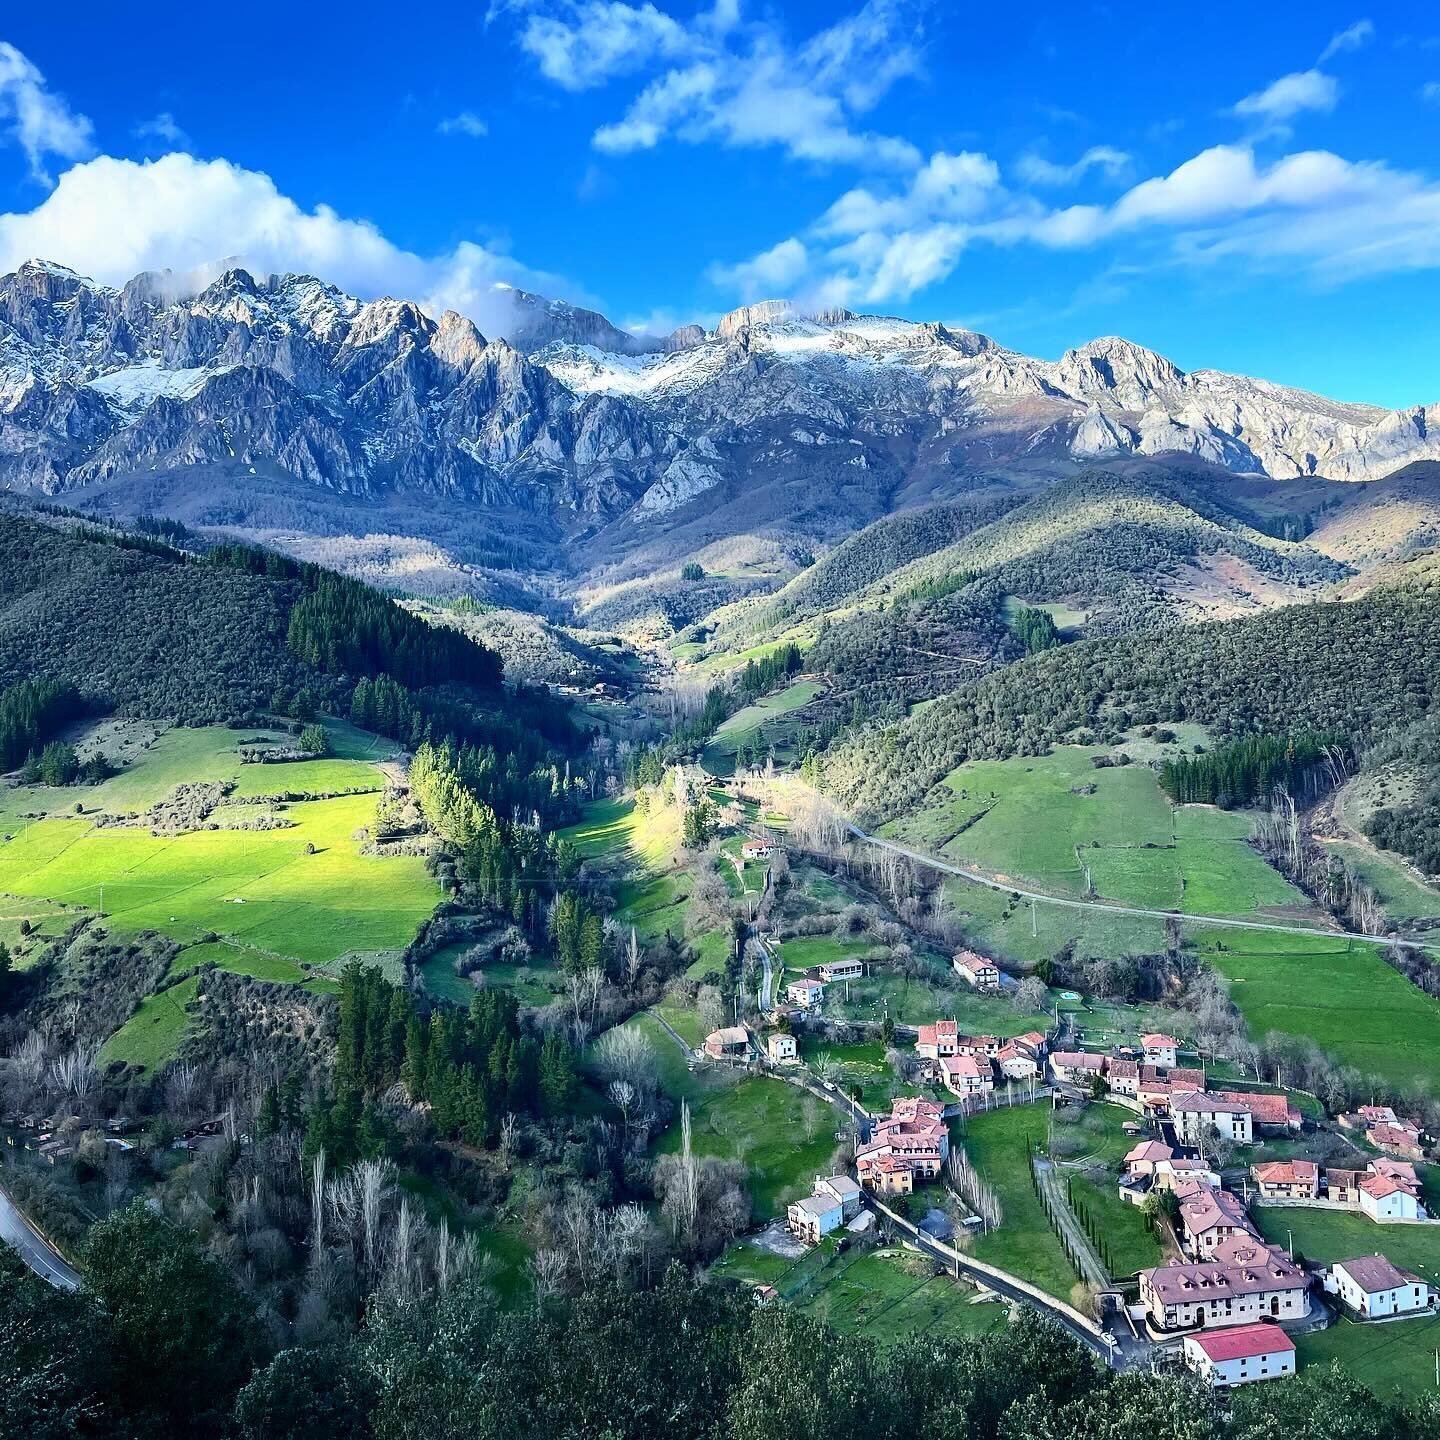 Alpine Valley.  #mountains #mountainlife #mountainlovers #landscape #landscapephotography #mountainscape #Spain